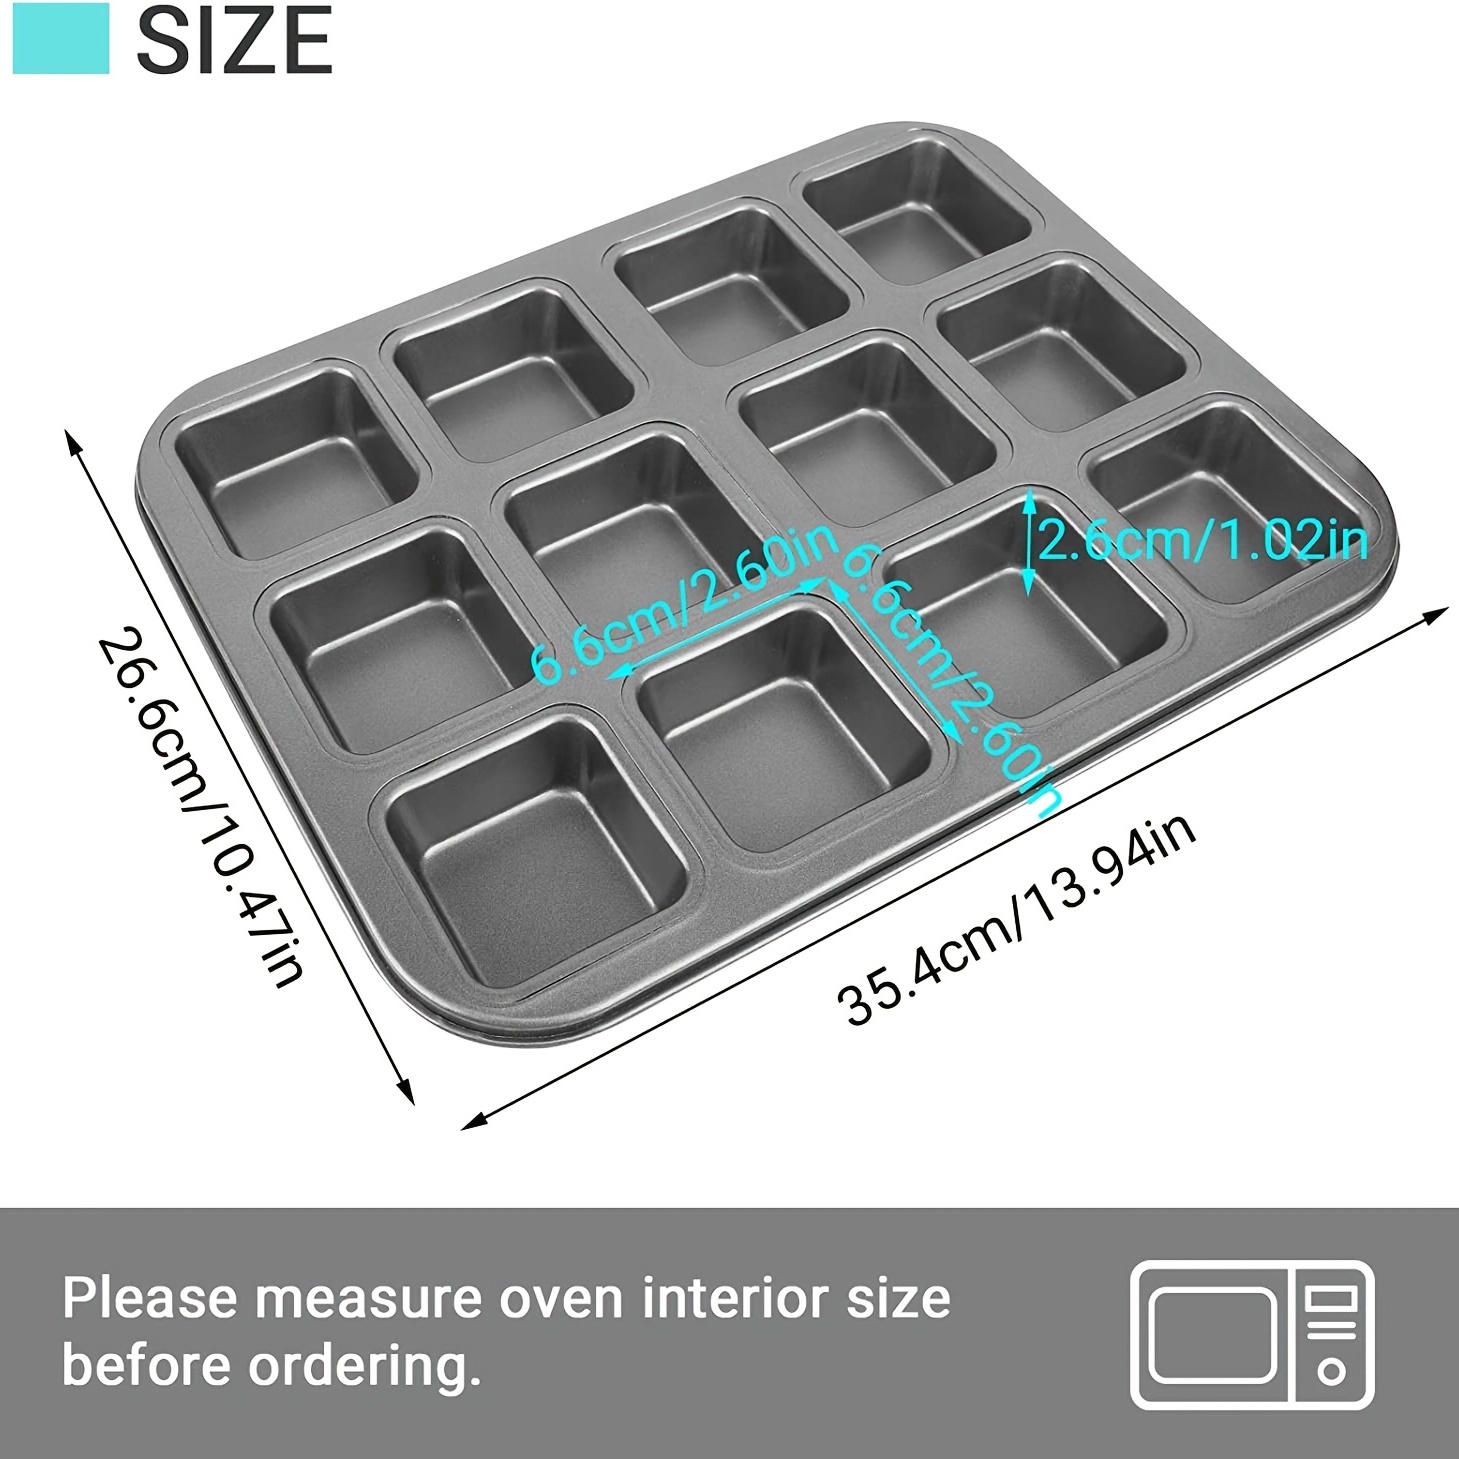 Eoonfirst Black Brownie Pan With Dividers, 1 Set 12 Square Cavity Mini Cake  Non Stick Baking